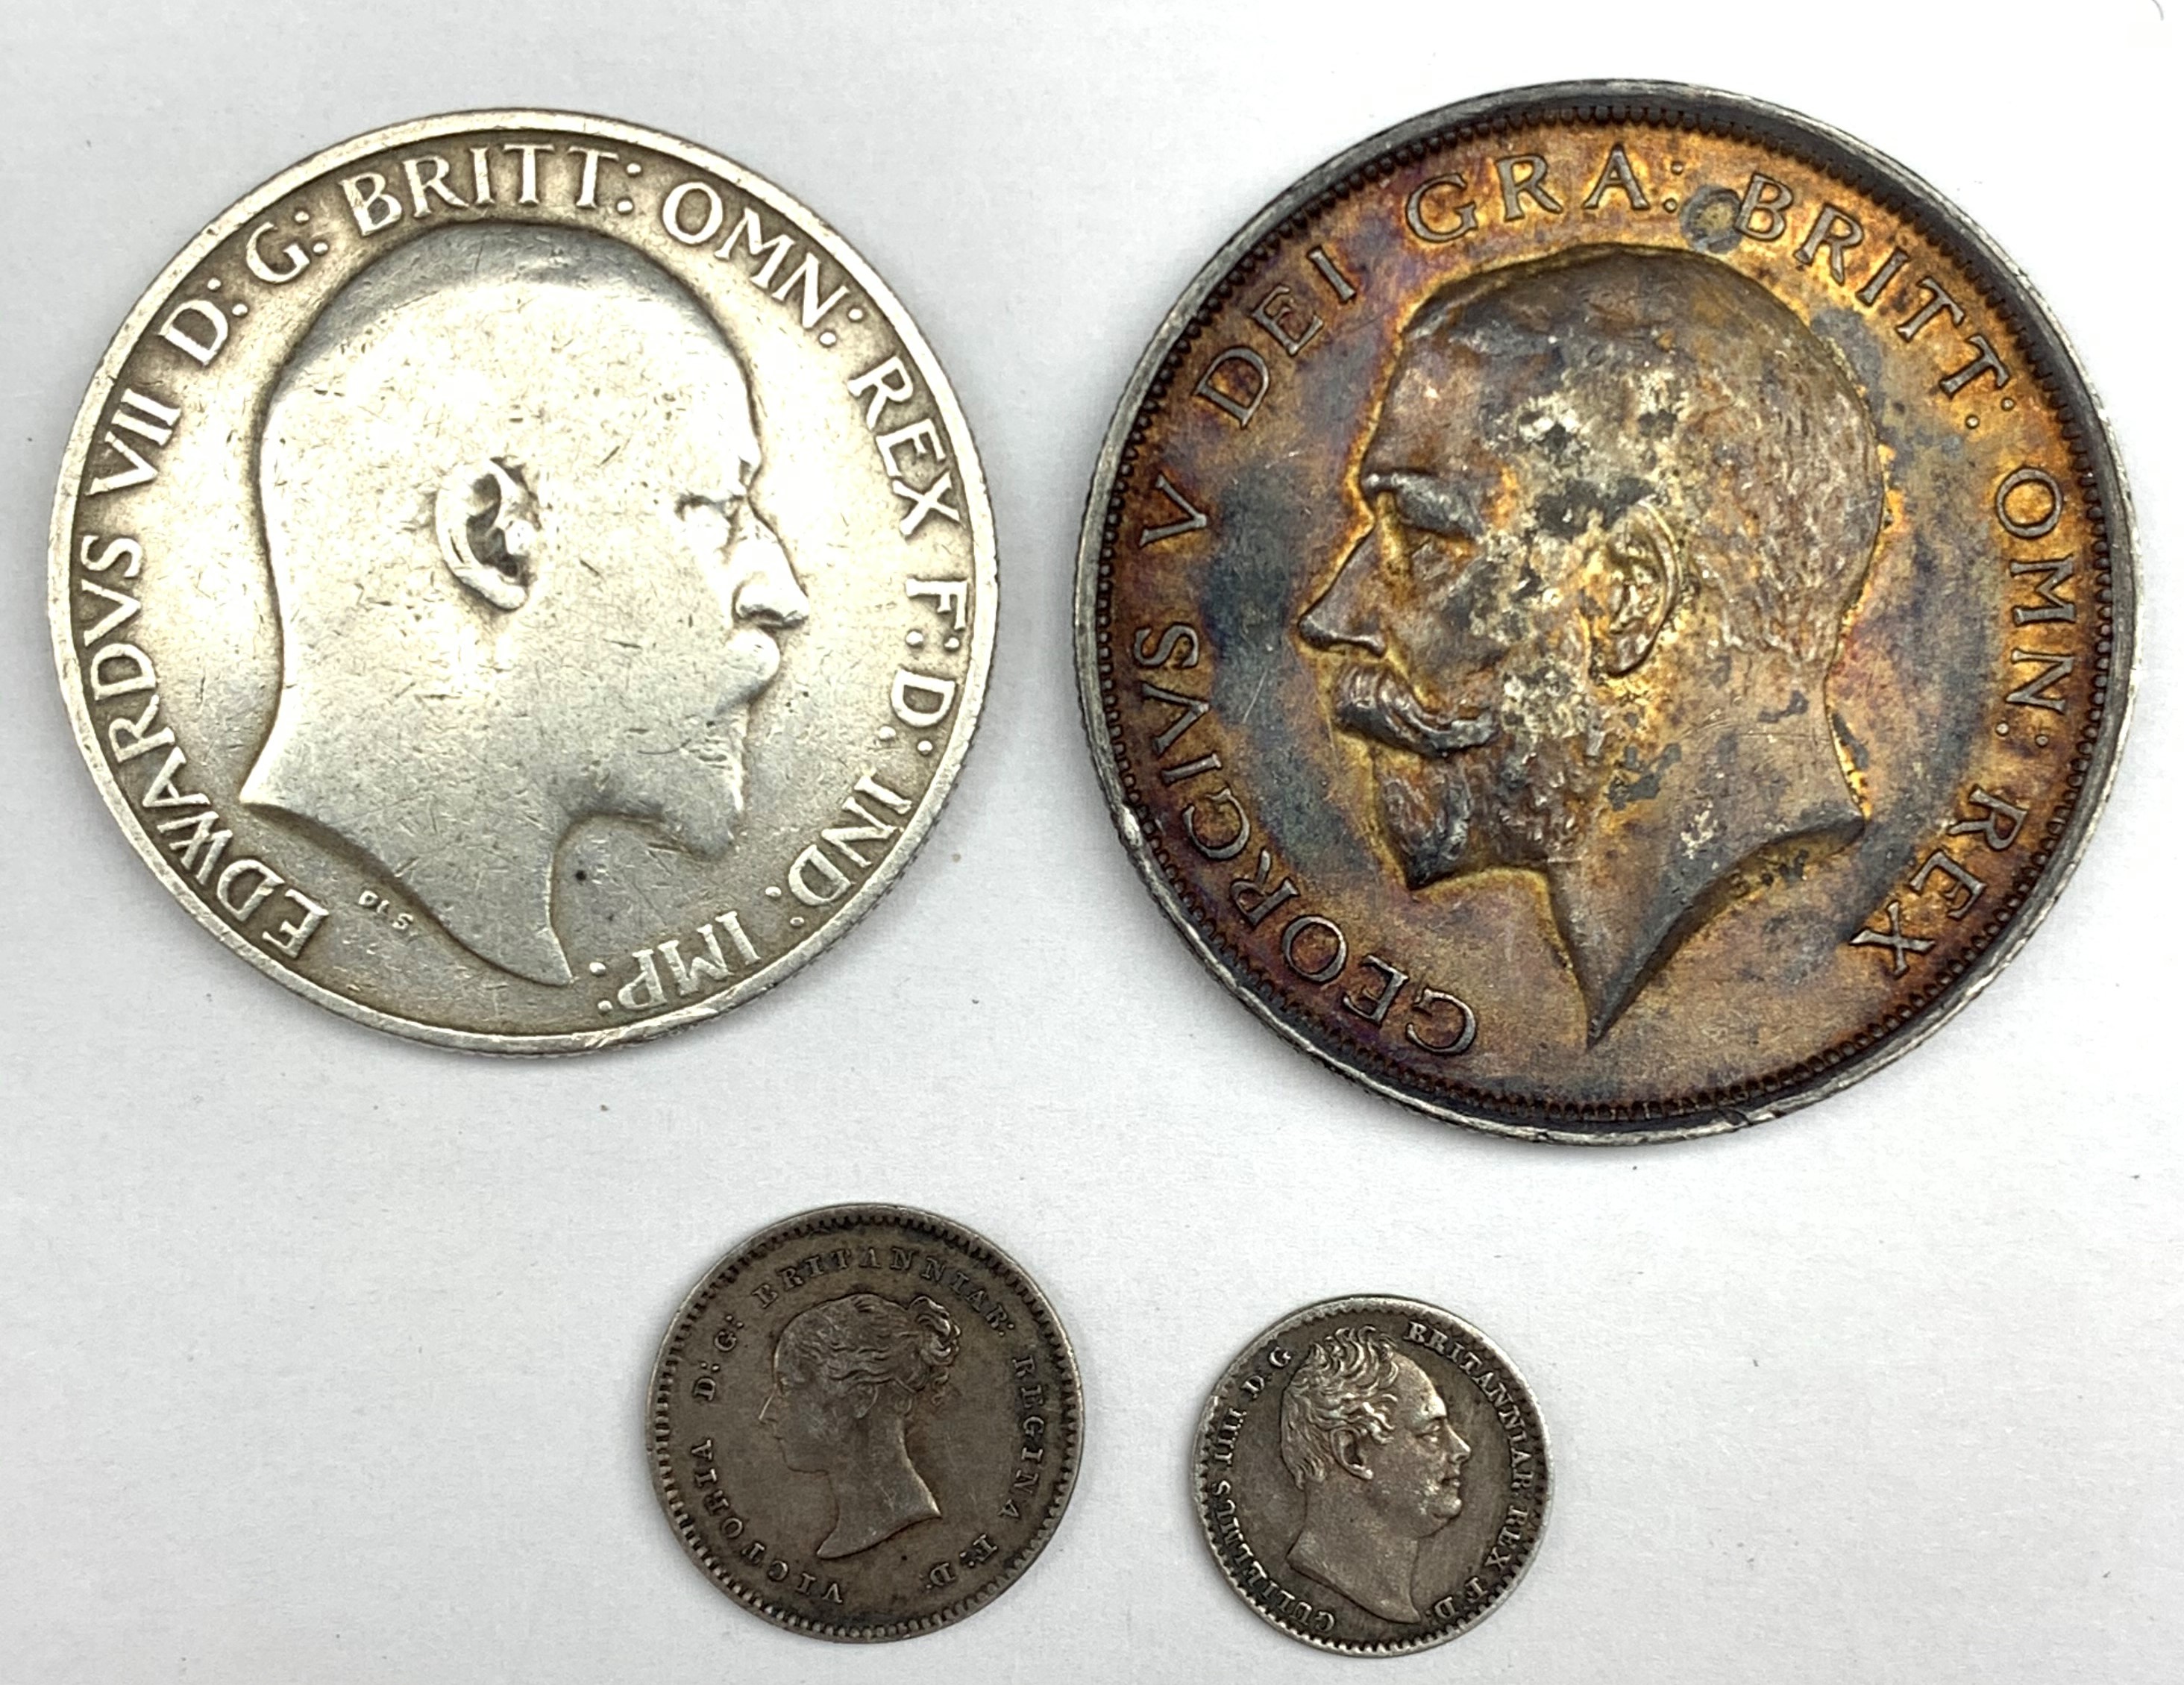 Queen Victoria 1839 maundy twopence, King William IV 1833maundy penny, King Edward VII standing Brit